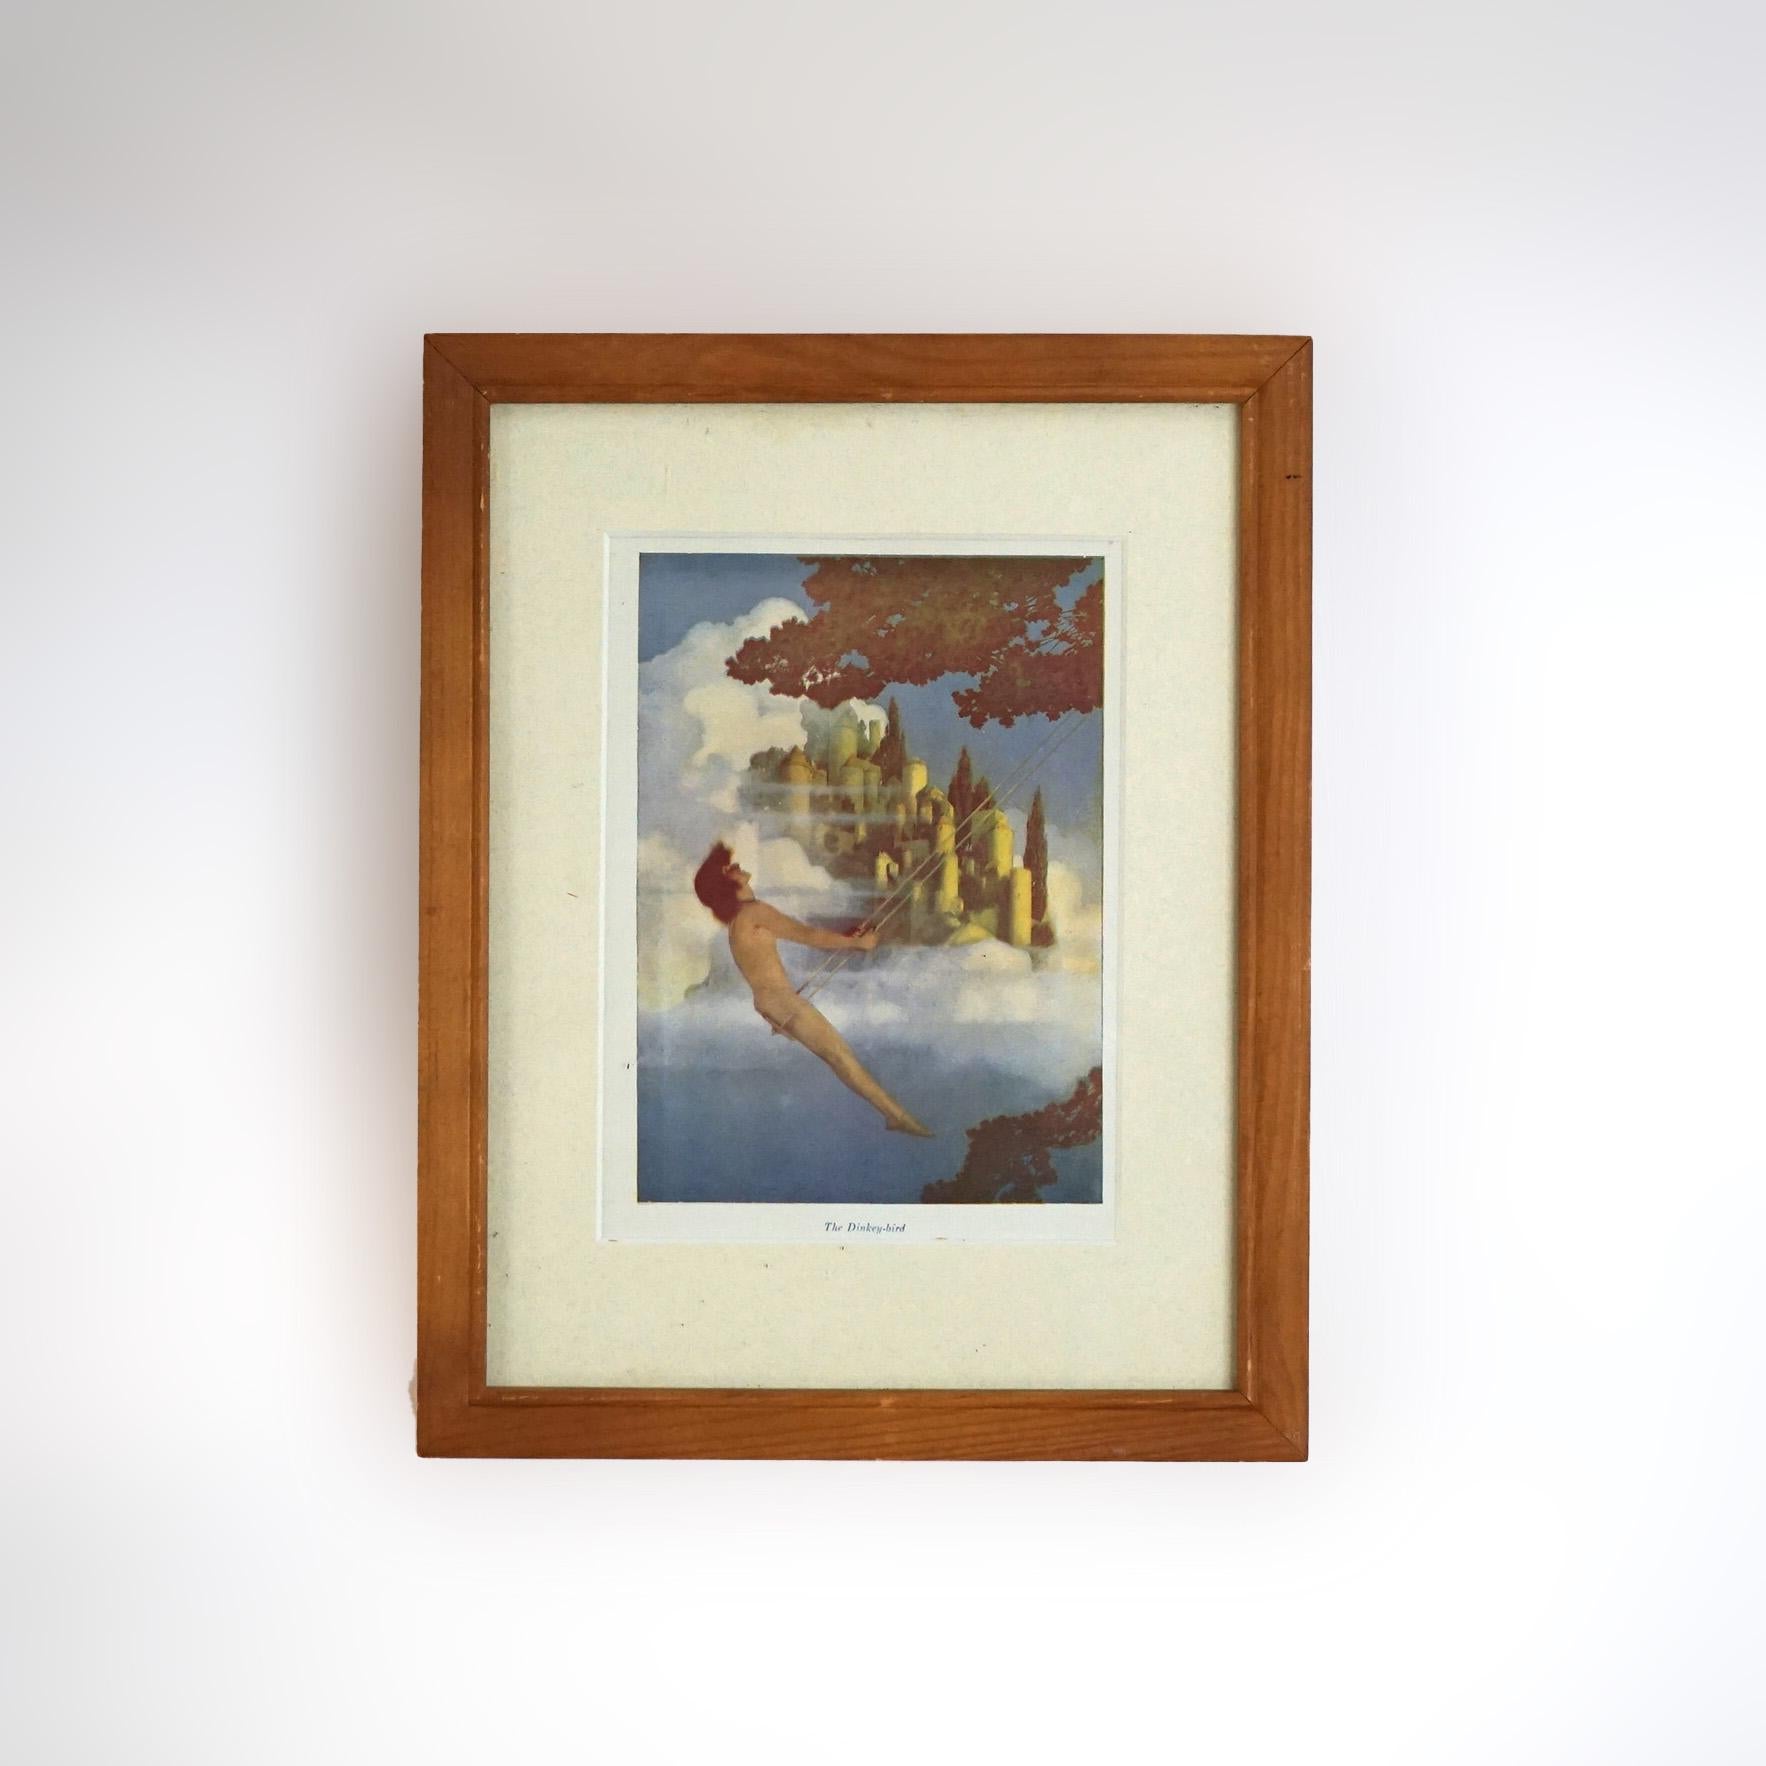 Five Art Deco Maxfield Parrish Bookplates, Framed, C1920 For Sale 2